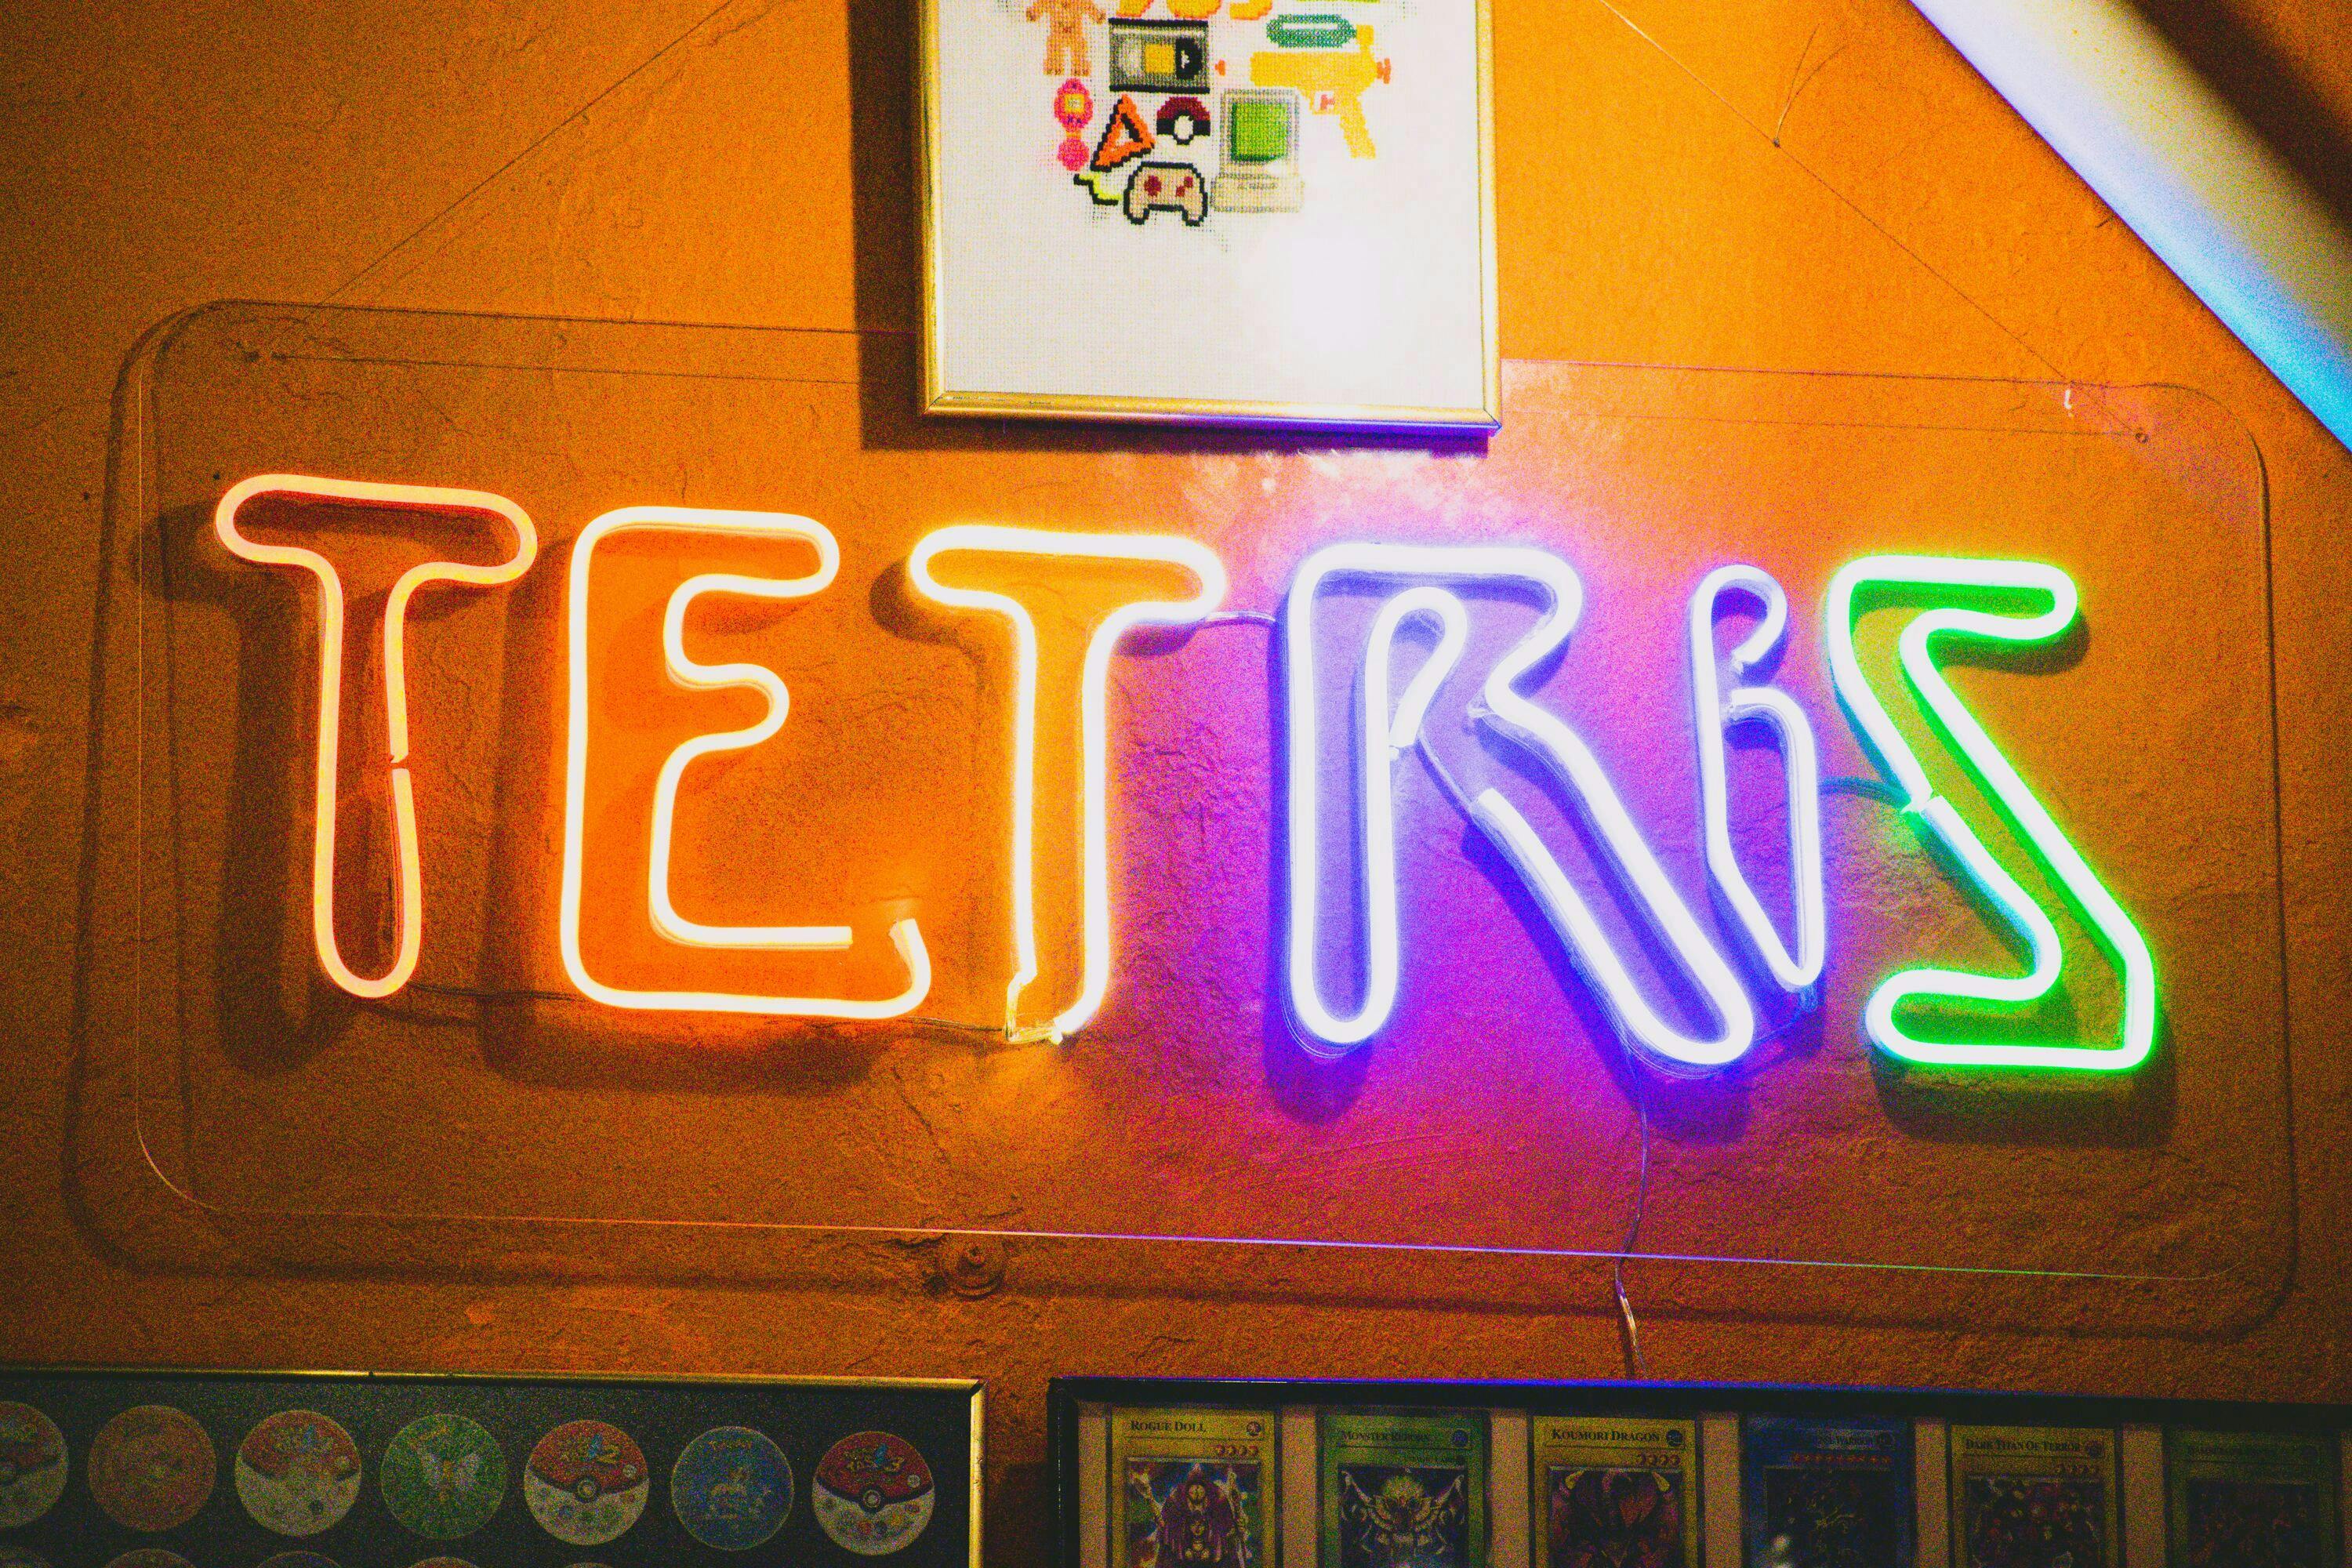 A decorative LED light as part of a gaming setup that illuminates the word "TETRIS" in different colors